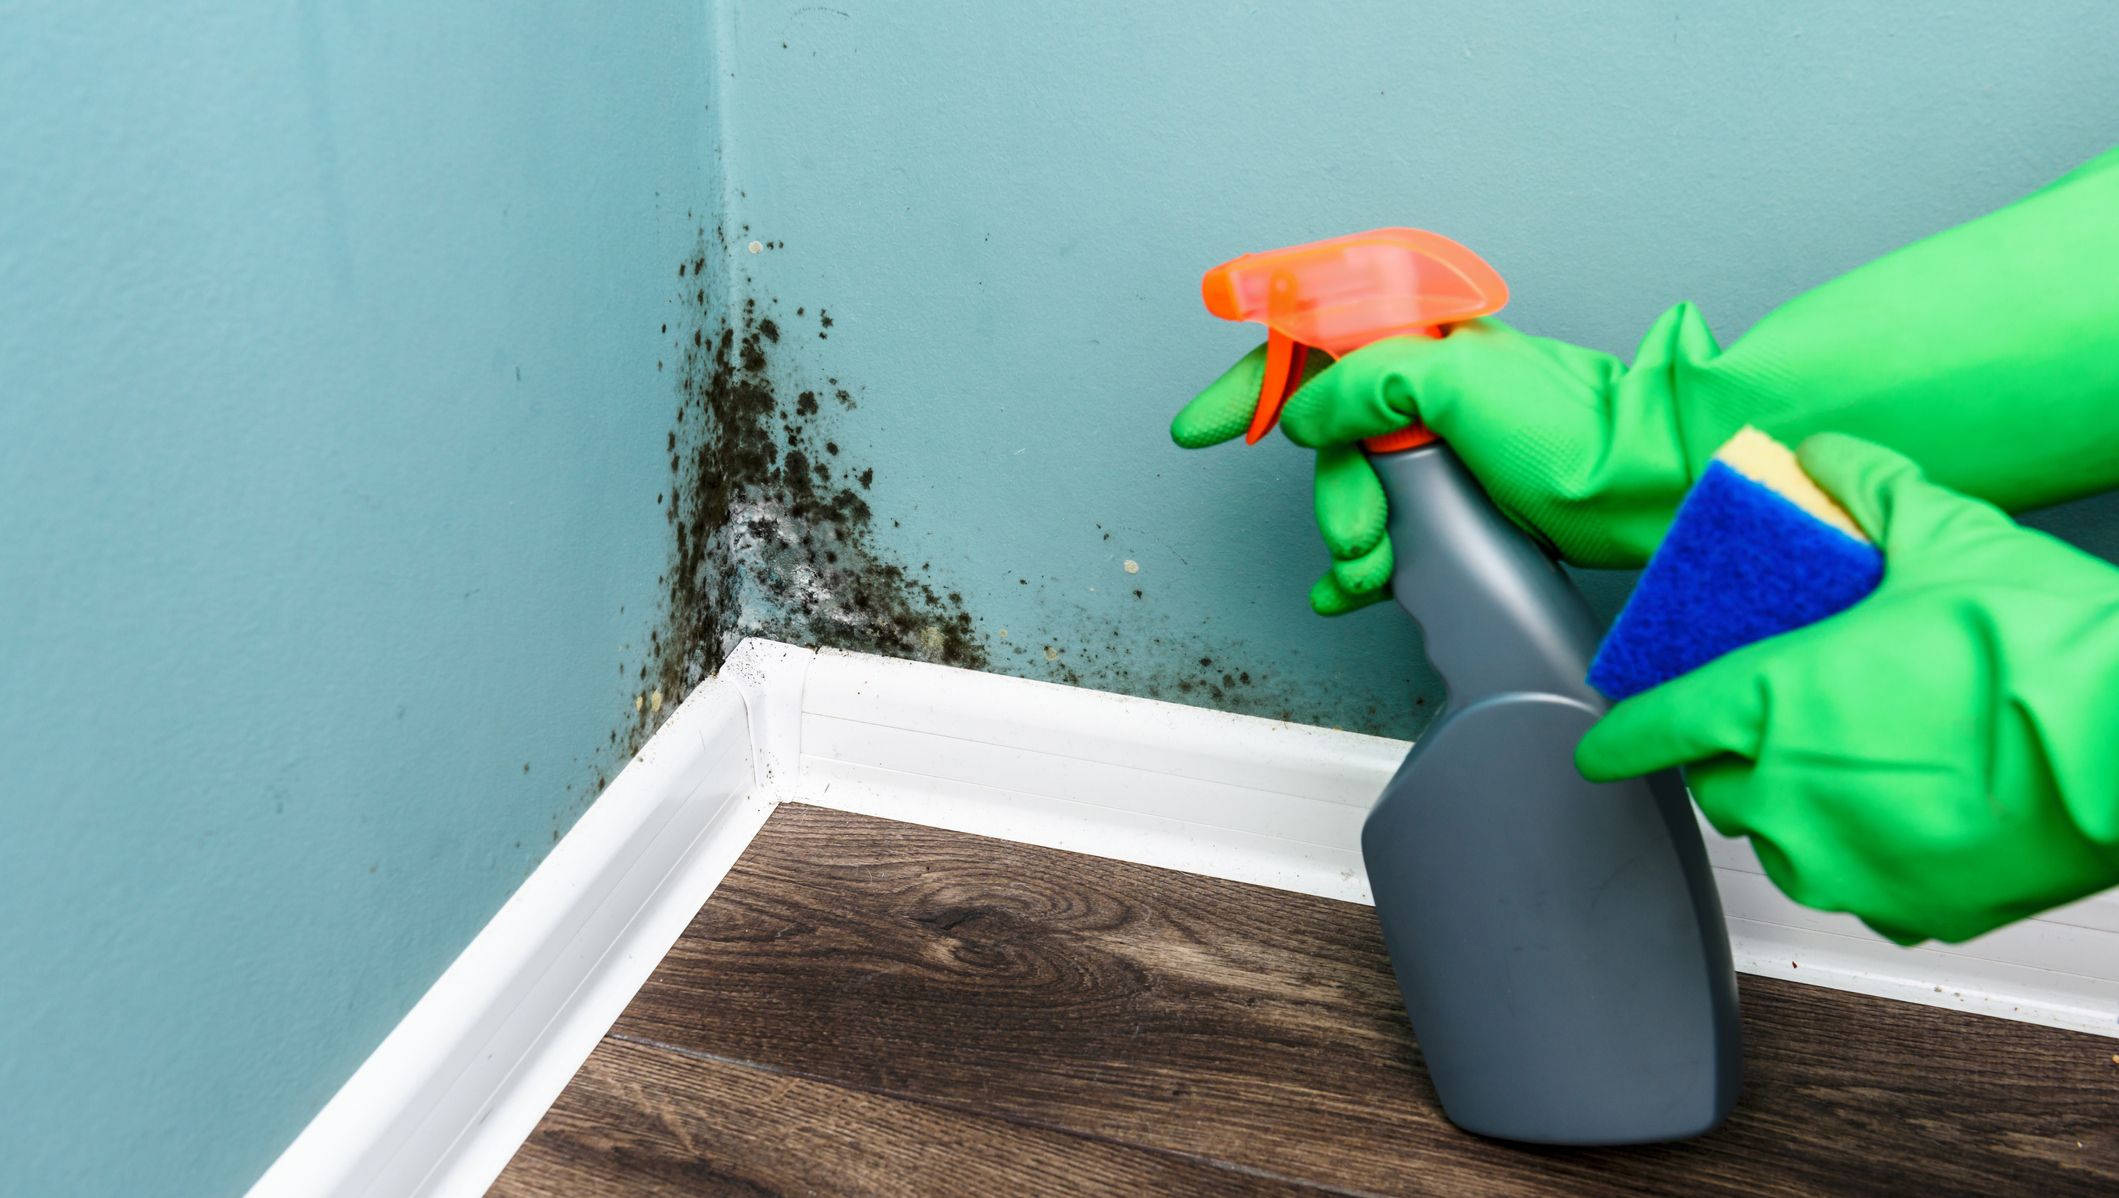 What Happens When You Eat Mold By Accident